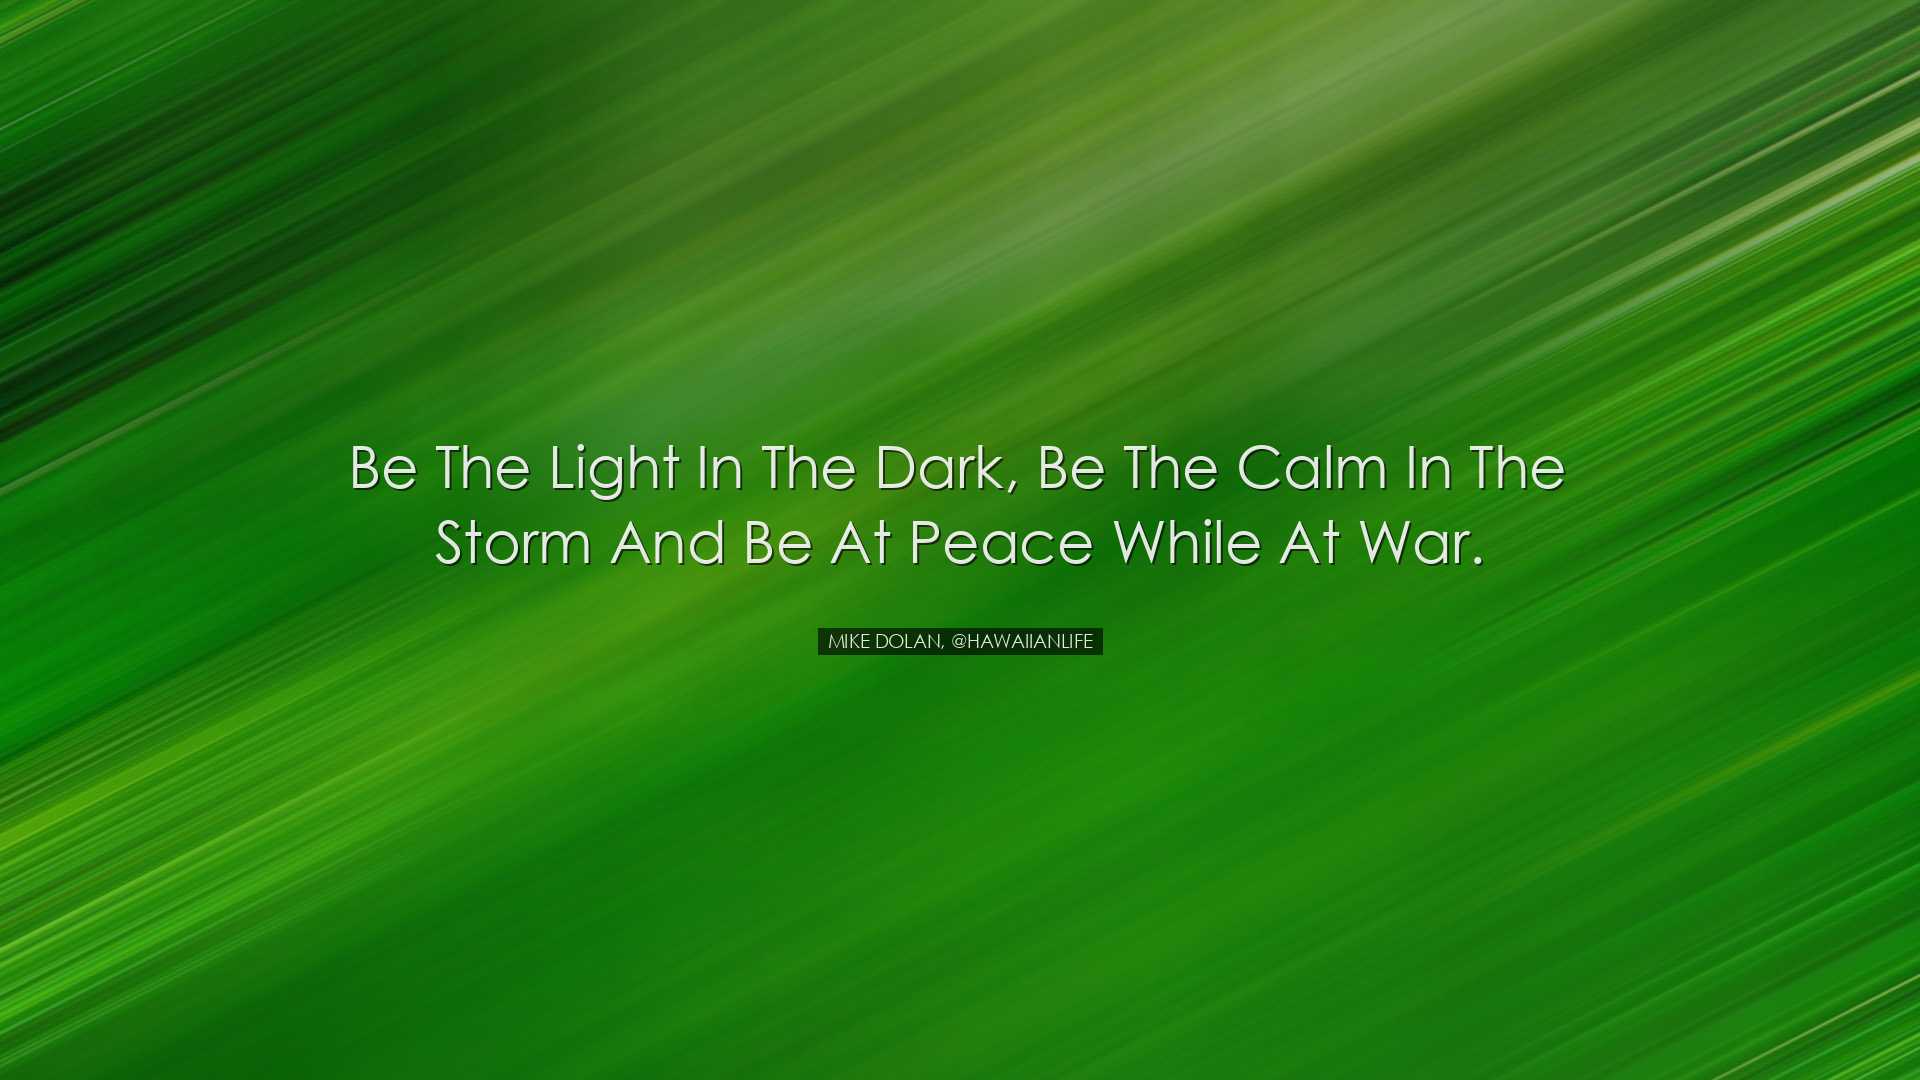 Be the light in the dark, be the calm in the storm and be at peace